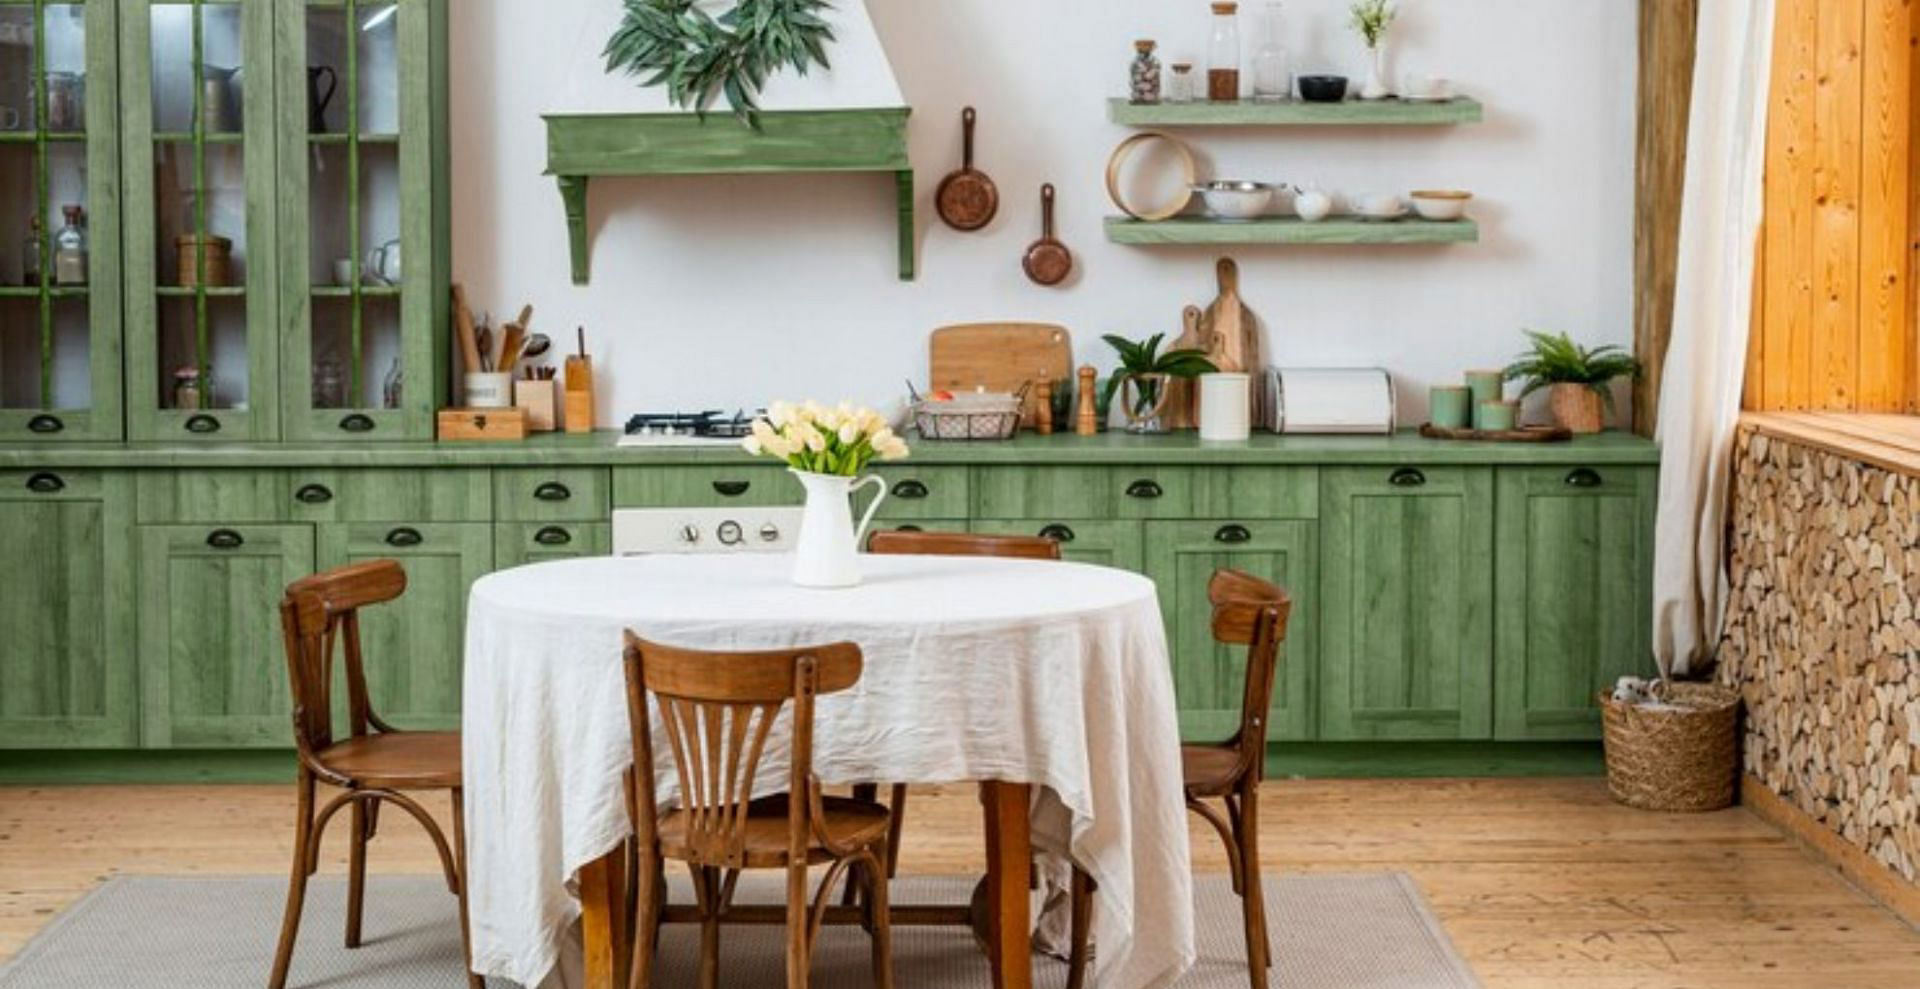 11 Boho-style kitchen decor ideas that you can use